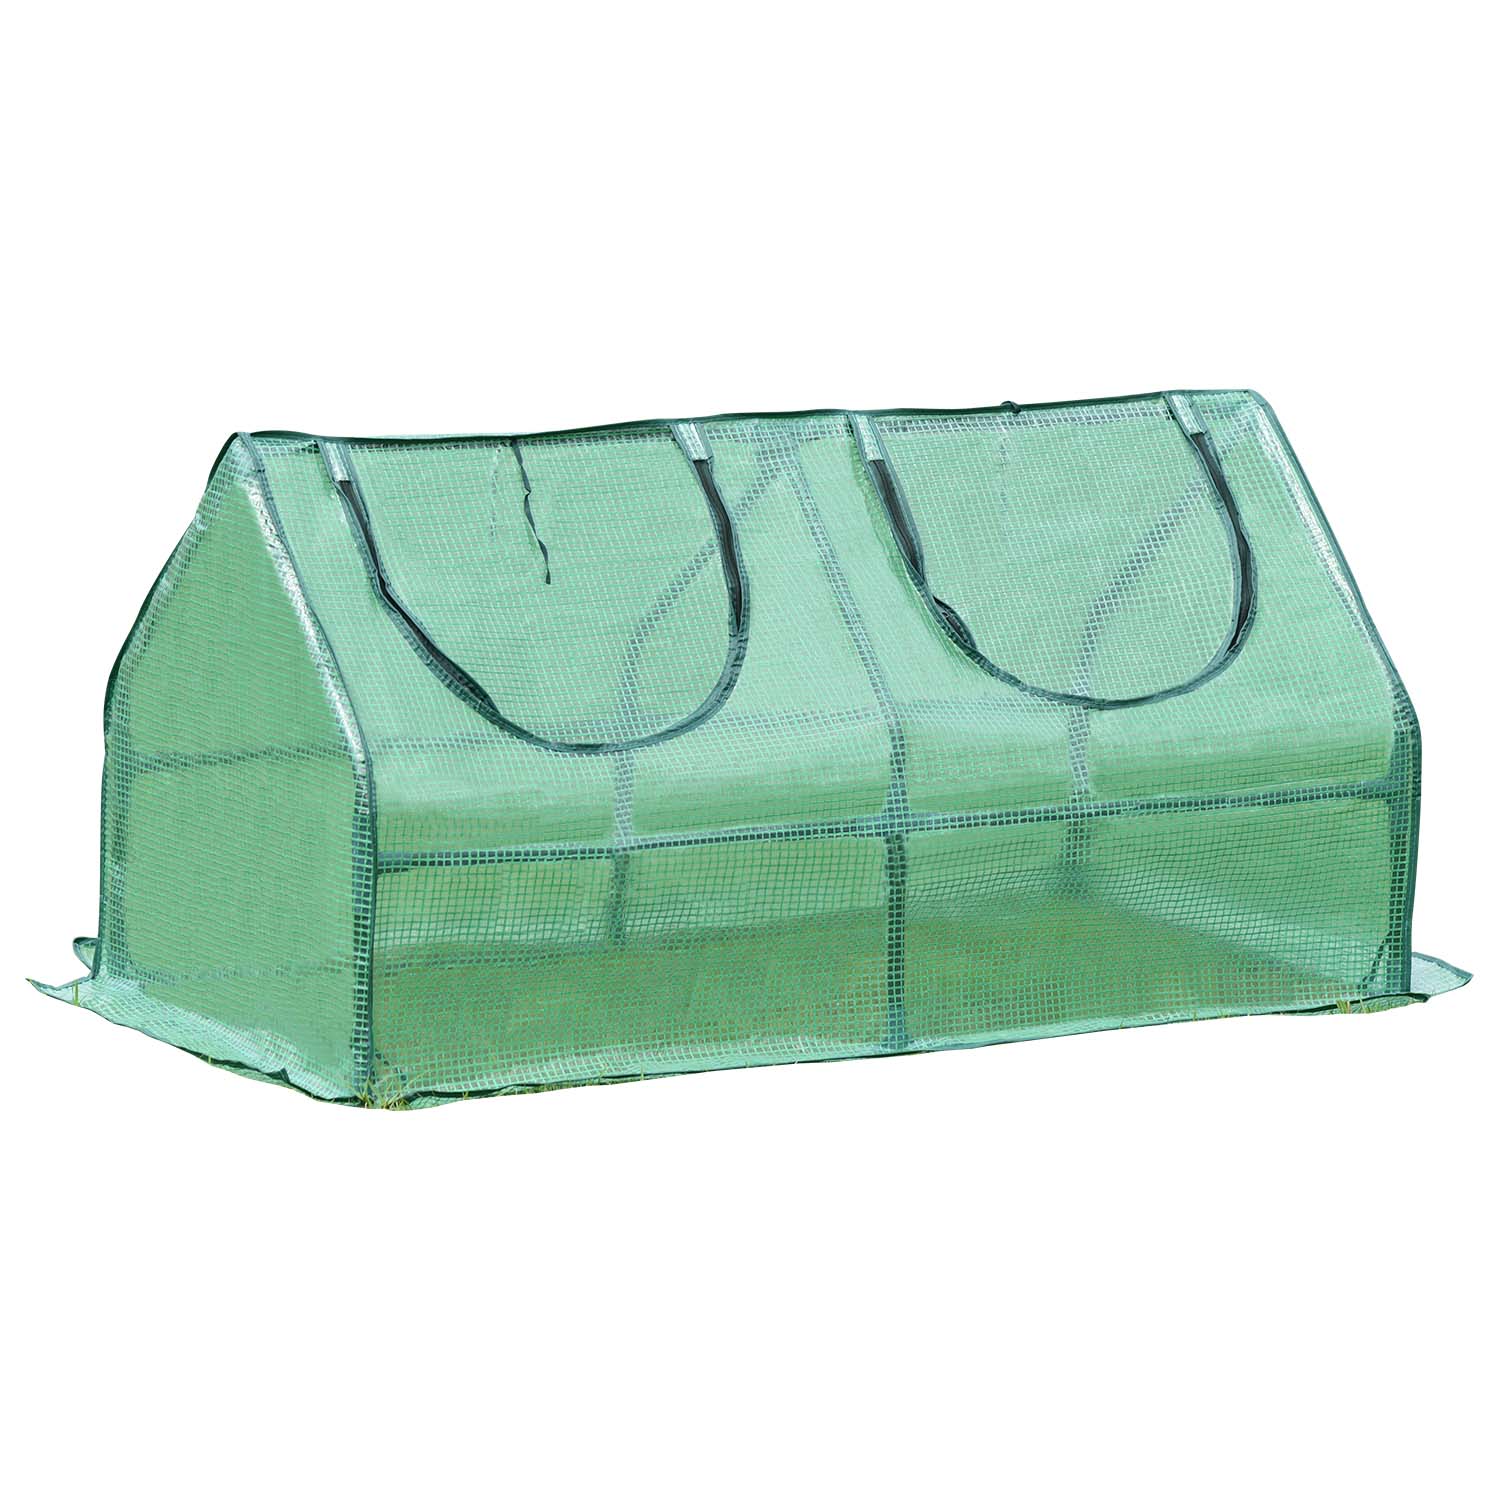 4 ft. x 2 ft. x 2 ft. Mini Greenhouse with Zipper Doors, Water Resistant & UV Protected Greenhouse Aoodor Green  